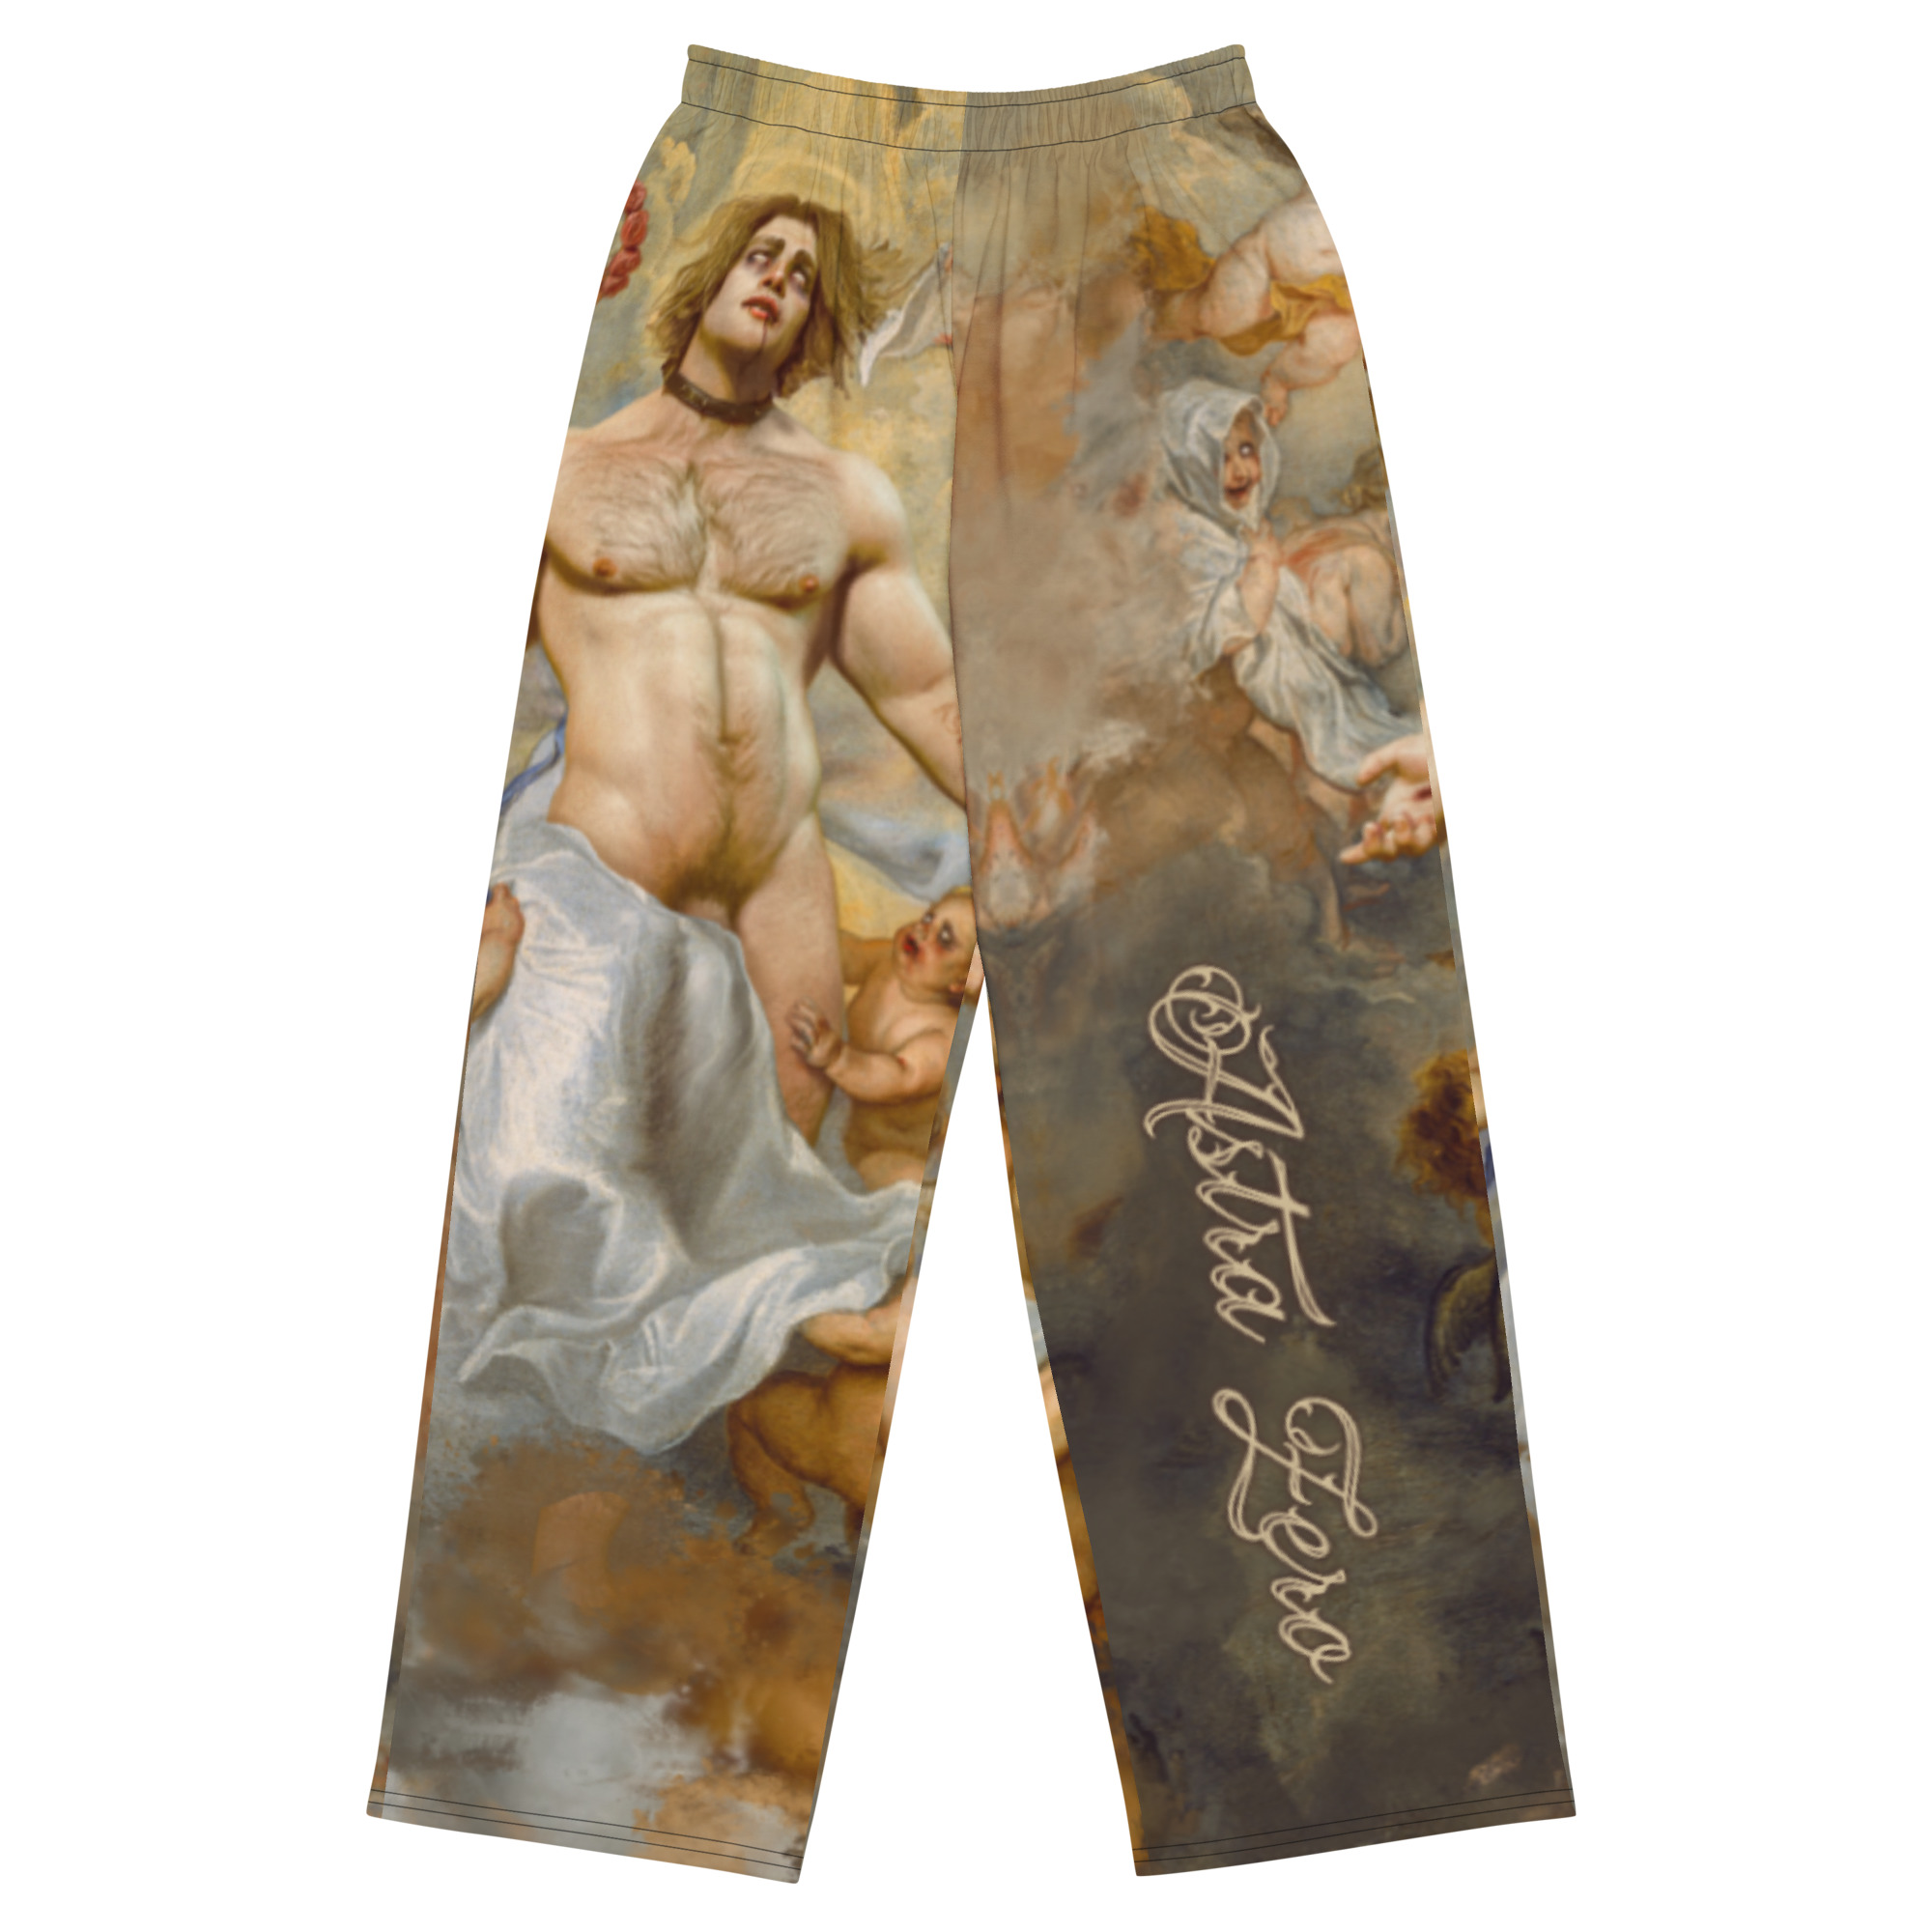 Featured image for “Morningstar - All-over print unisex wide-leg pants”